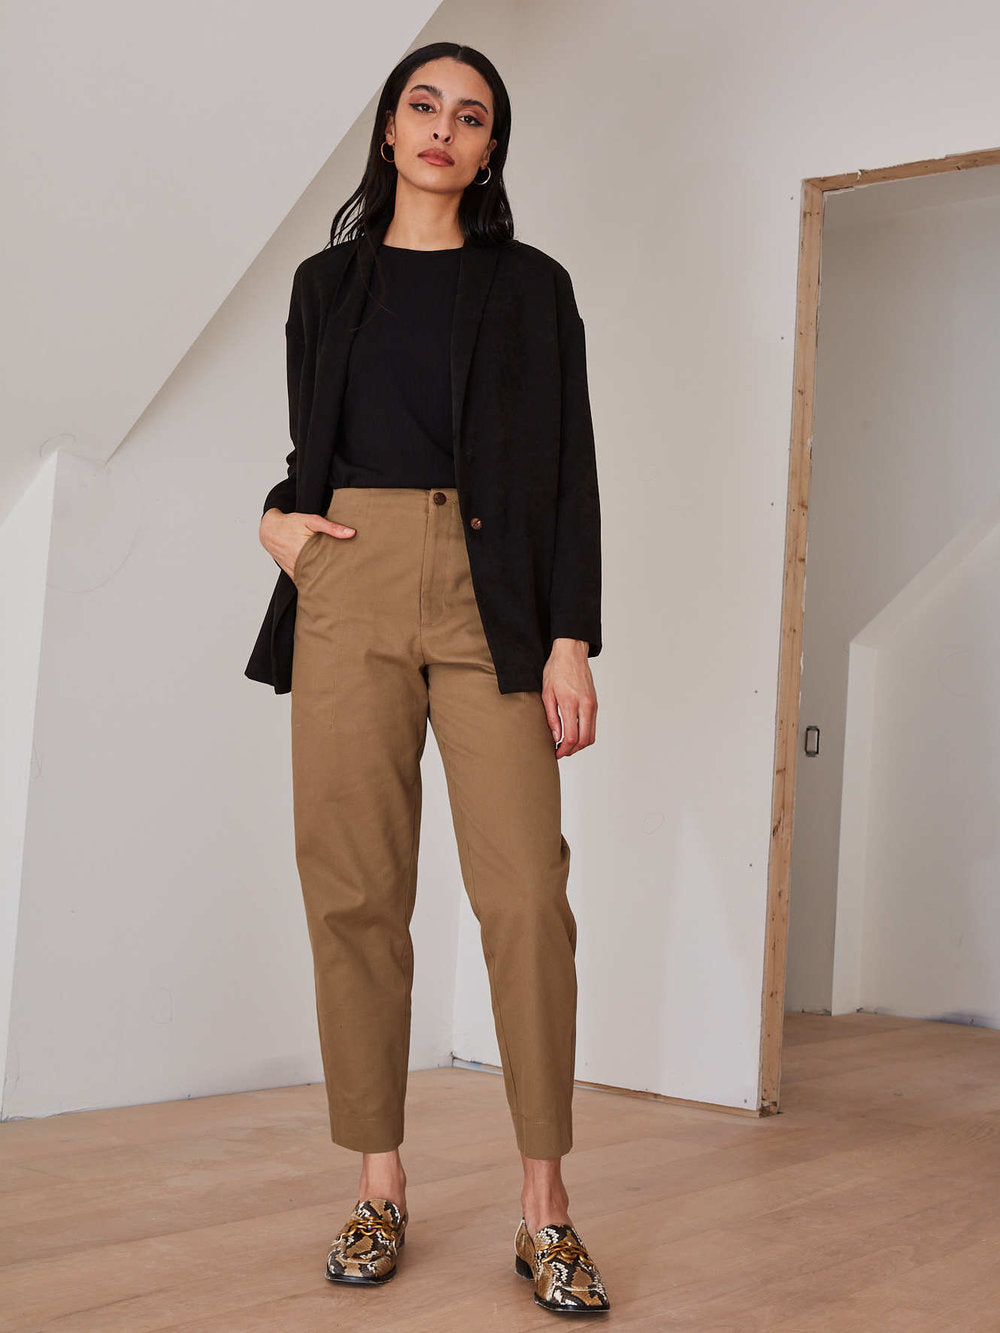 Dagg & Stacey Fall 23/24 Eugene Pant in Sanded Twill